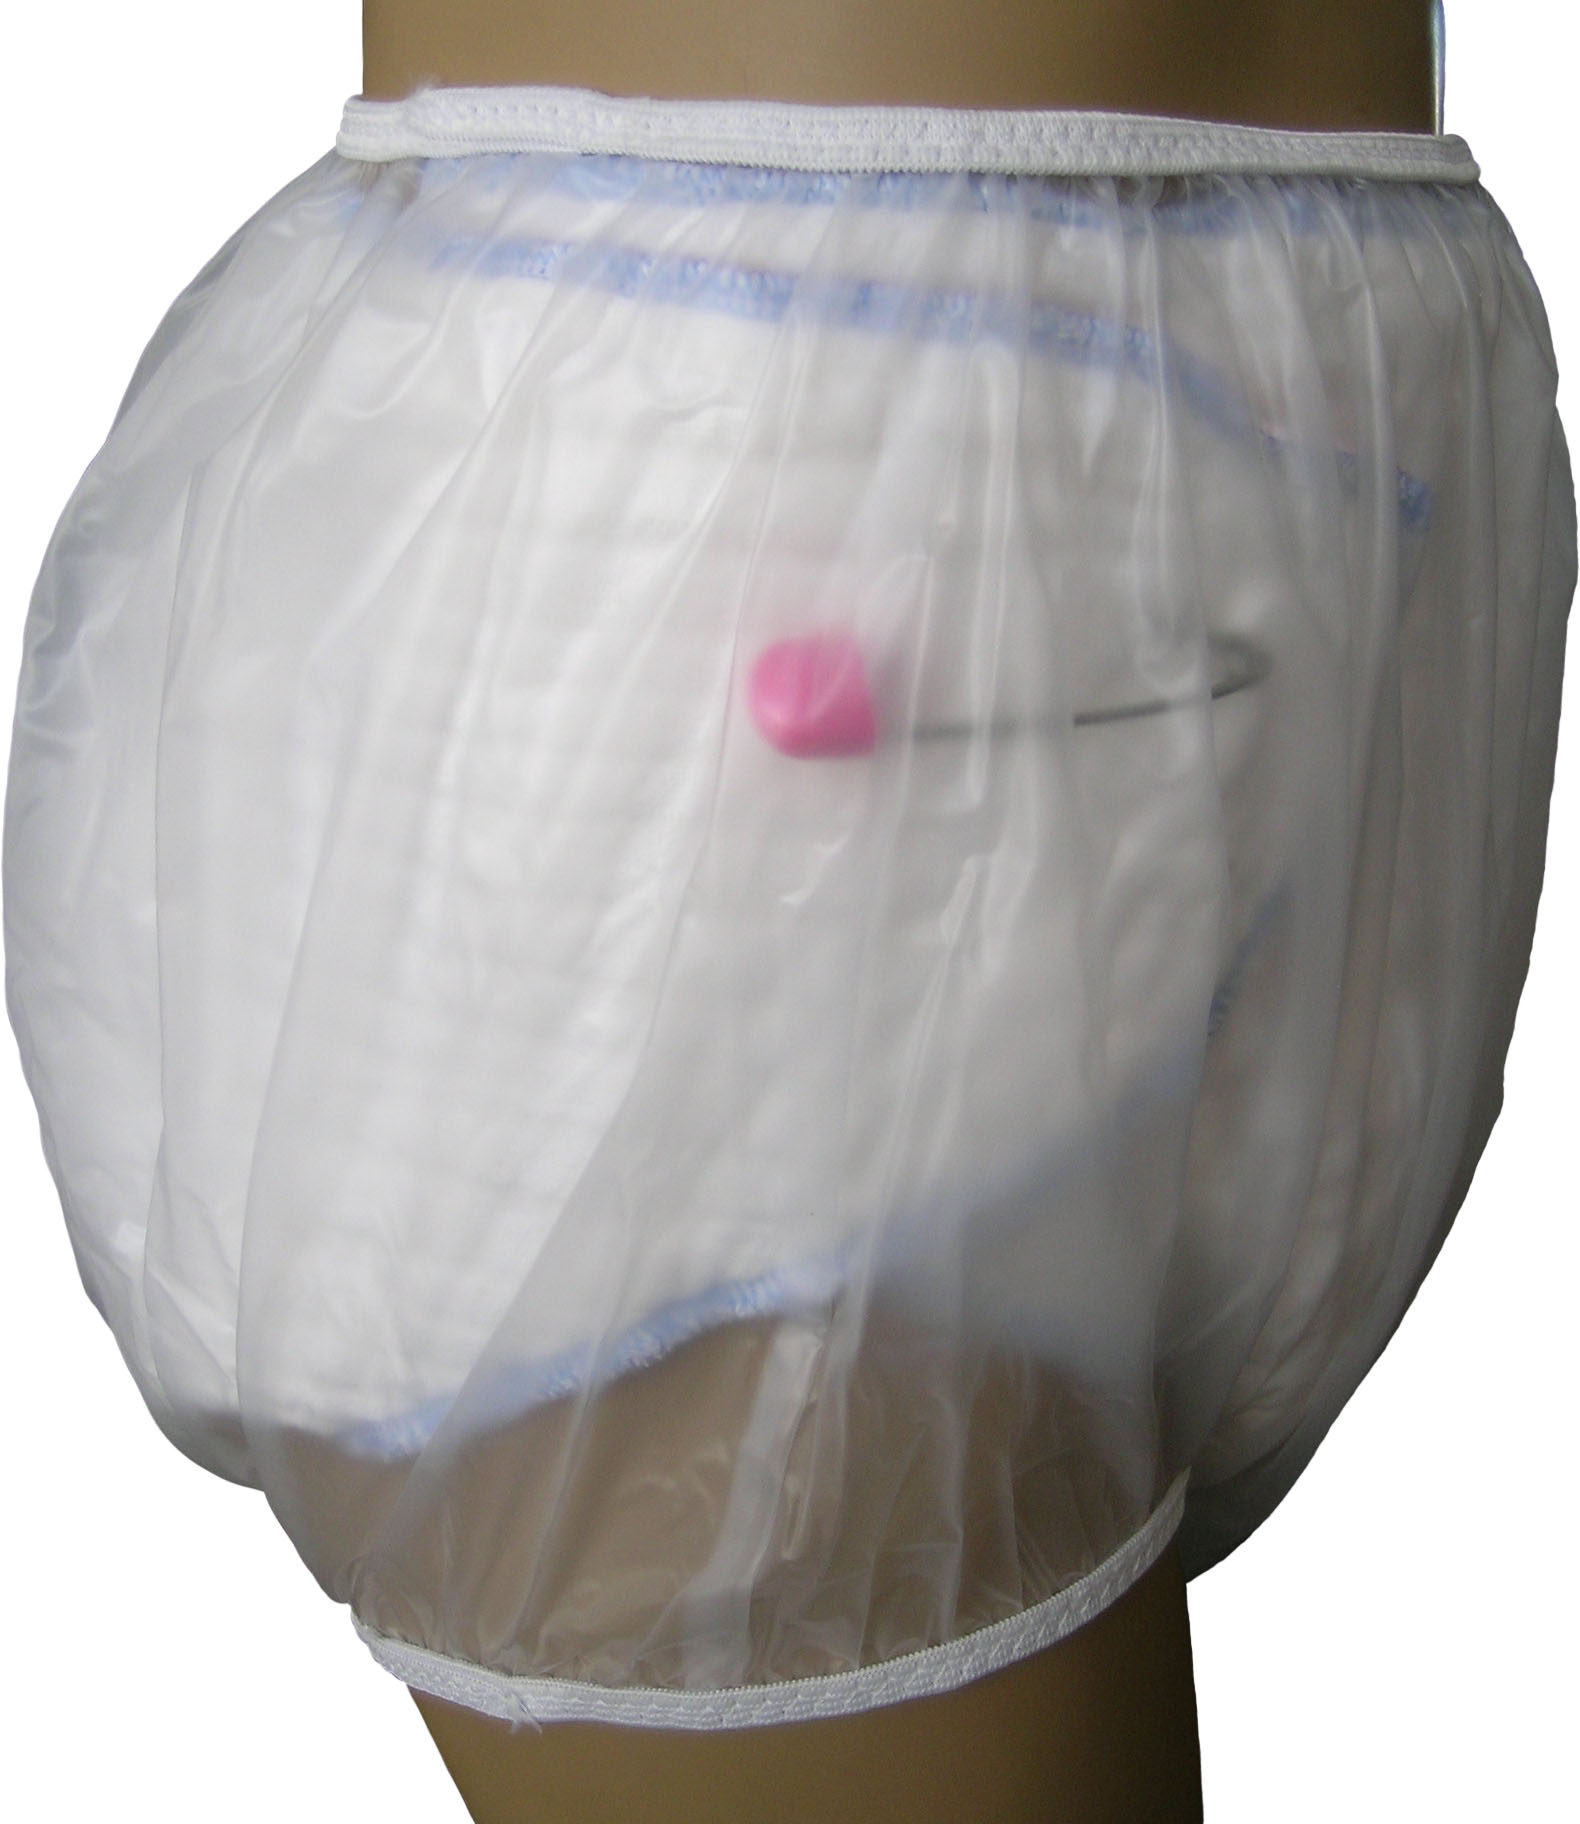 Images  Plastic pants, Disposable diapers, Baby cloth diaper